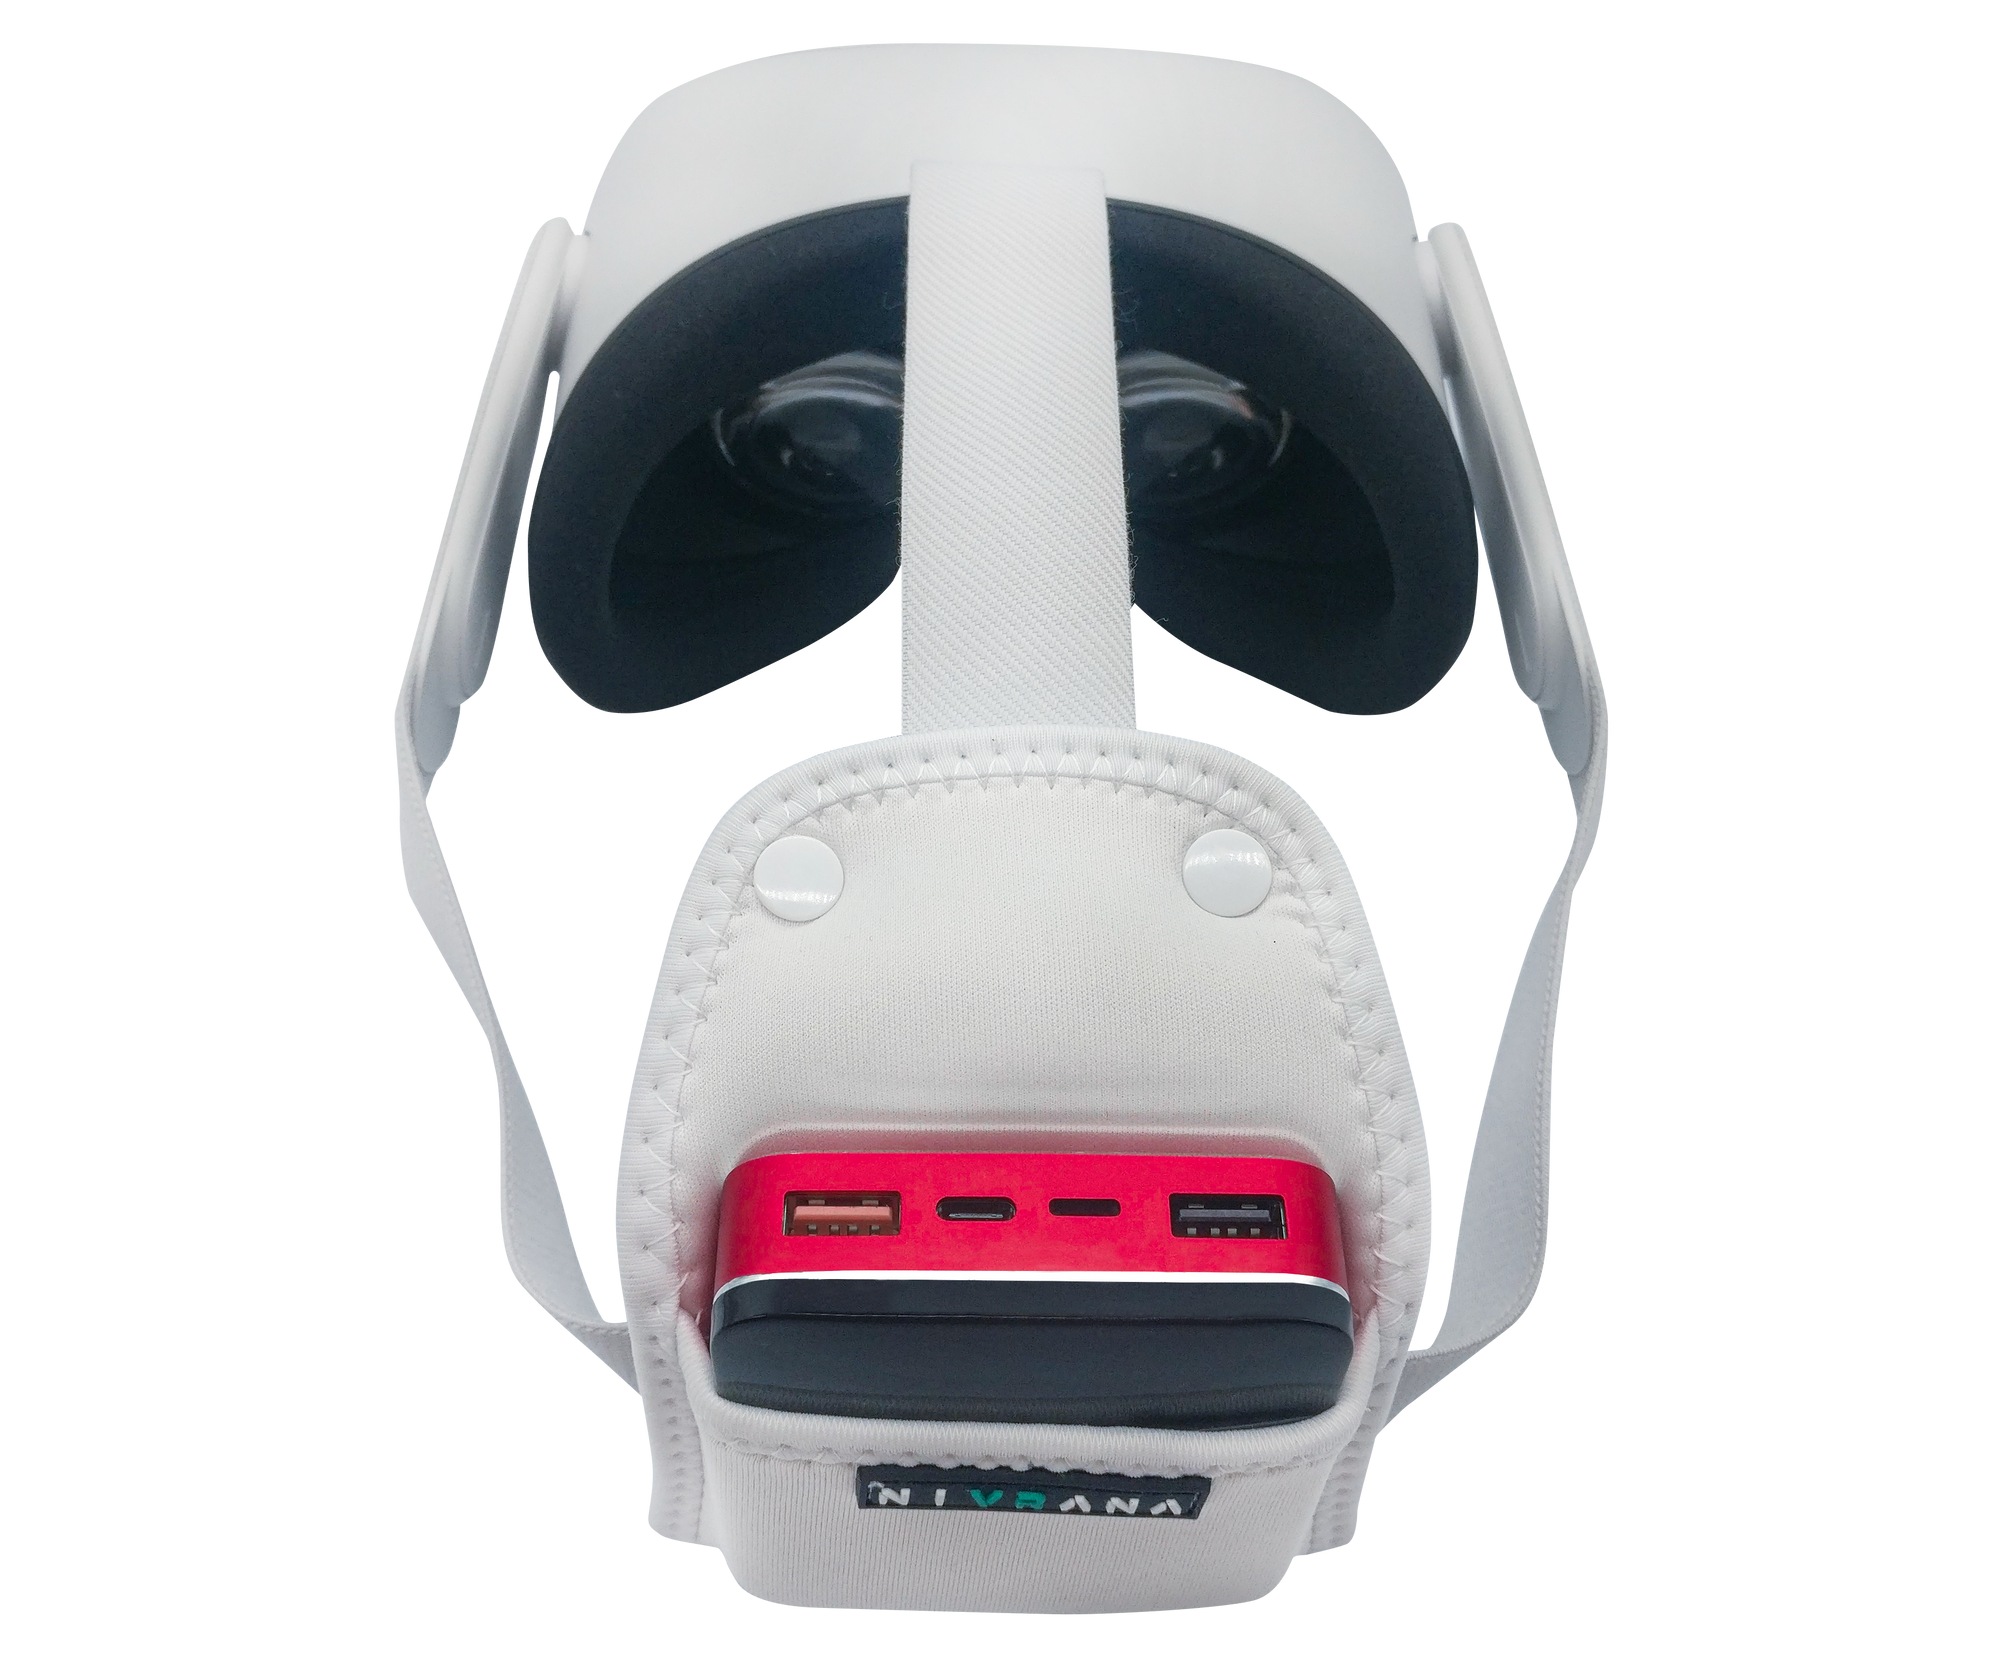 Head Strap and Face Protector for Meta Quest 3